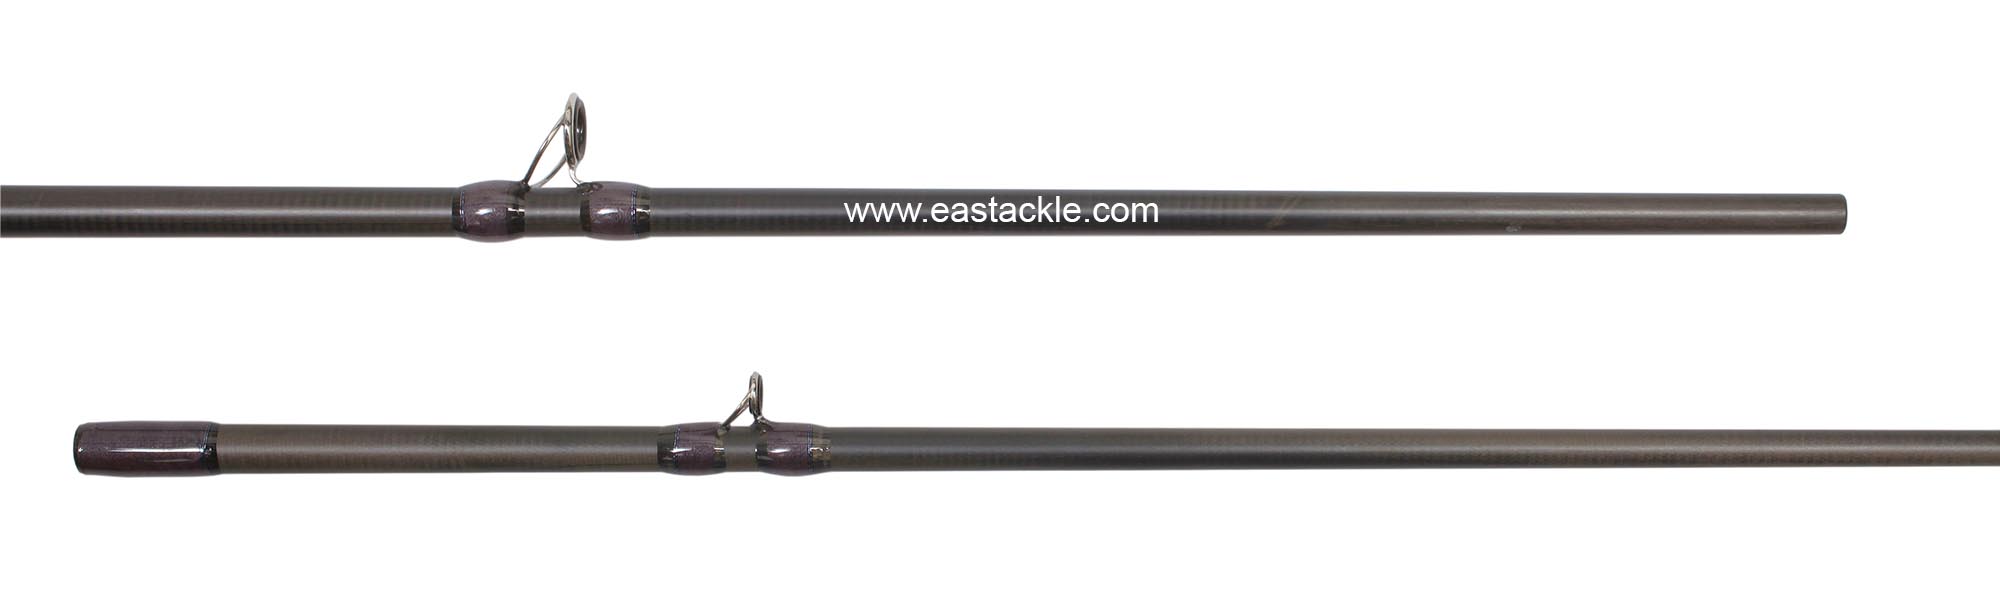 Storm - Adventure - AVC662MF - Bait Casting Rod - Joint Section (Side View) | Eastackle